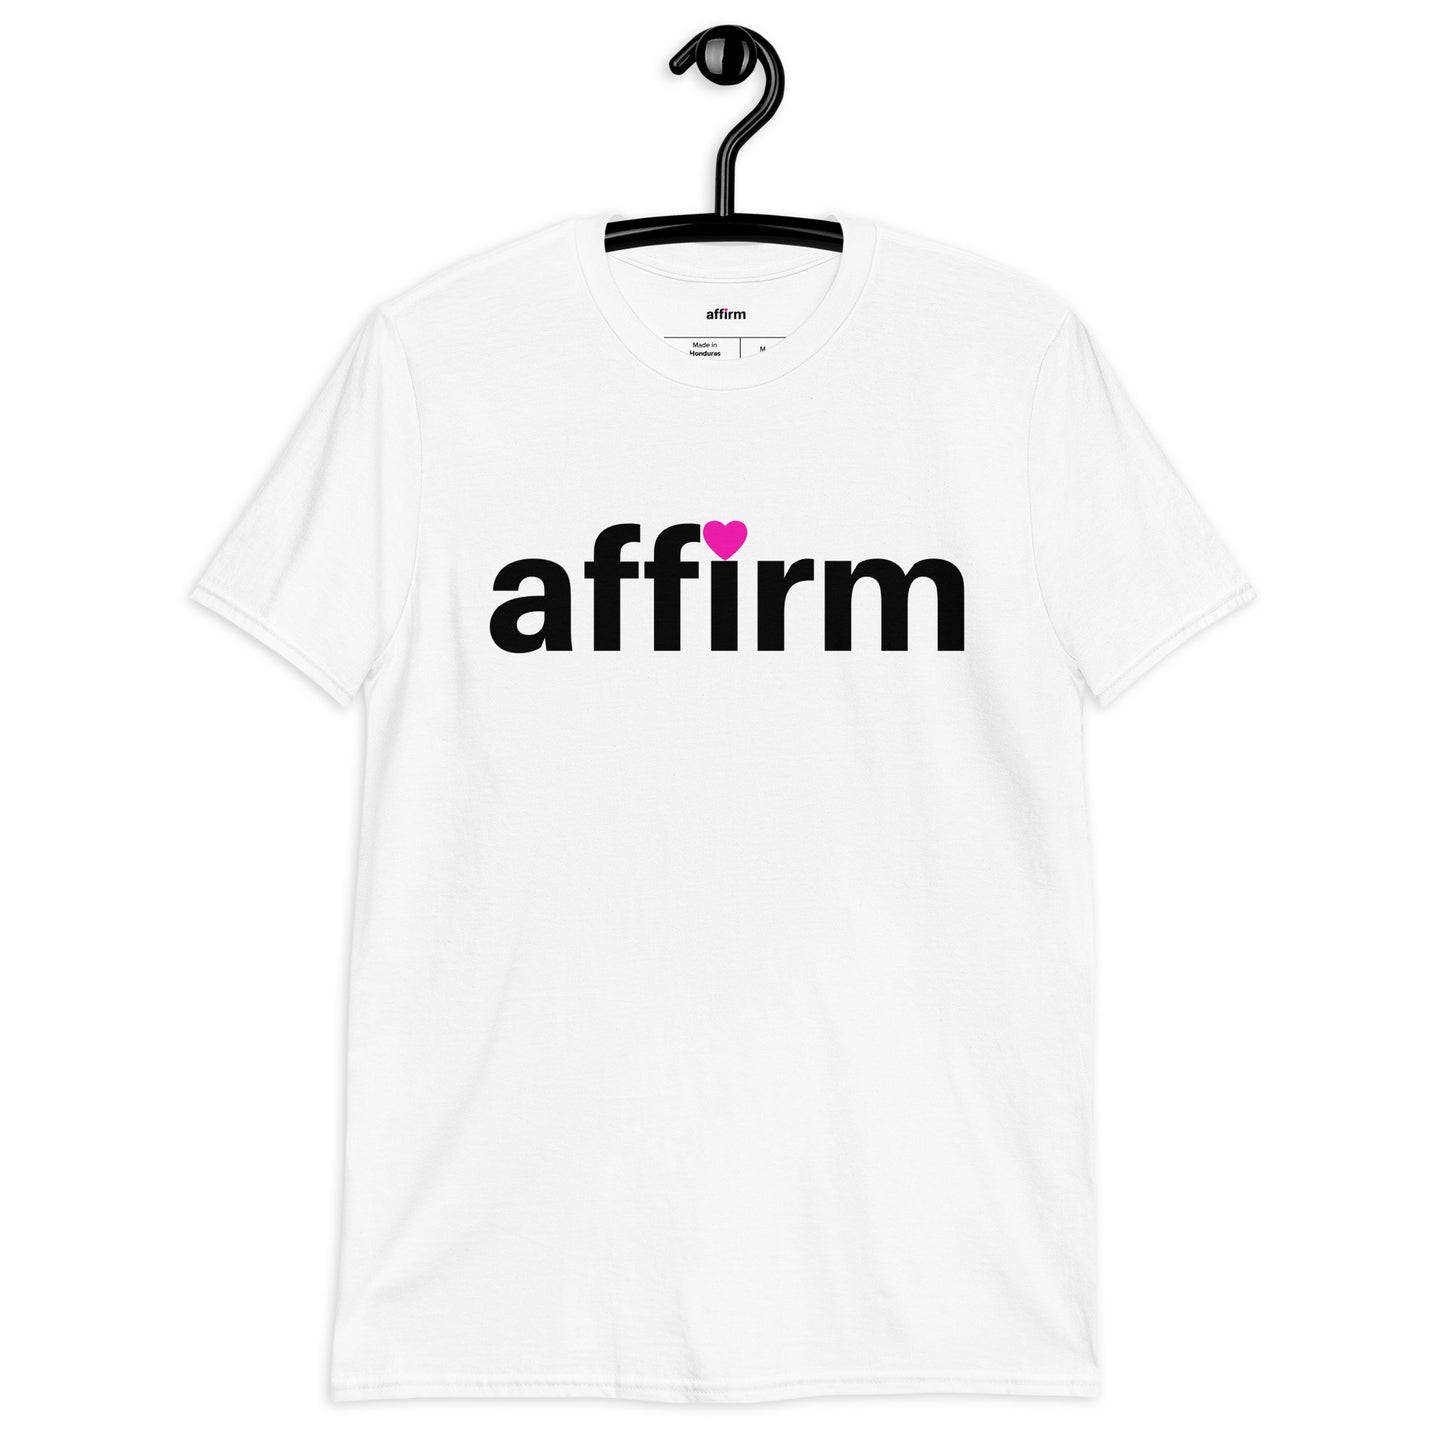 affirm classic white tee